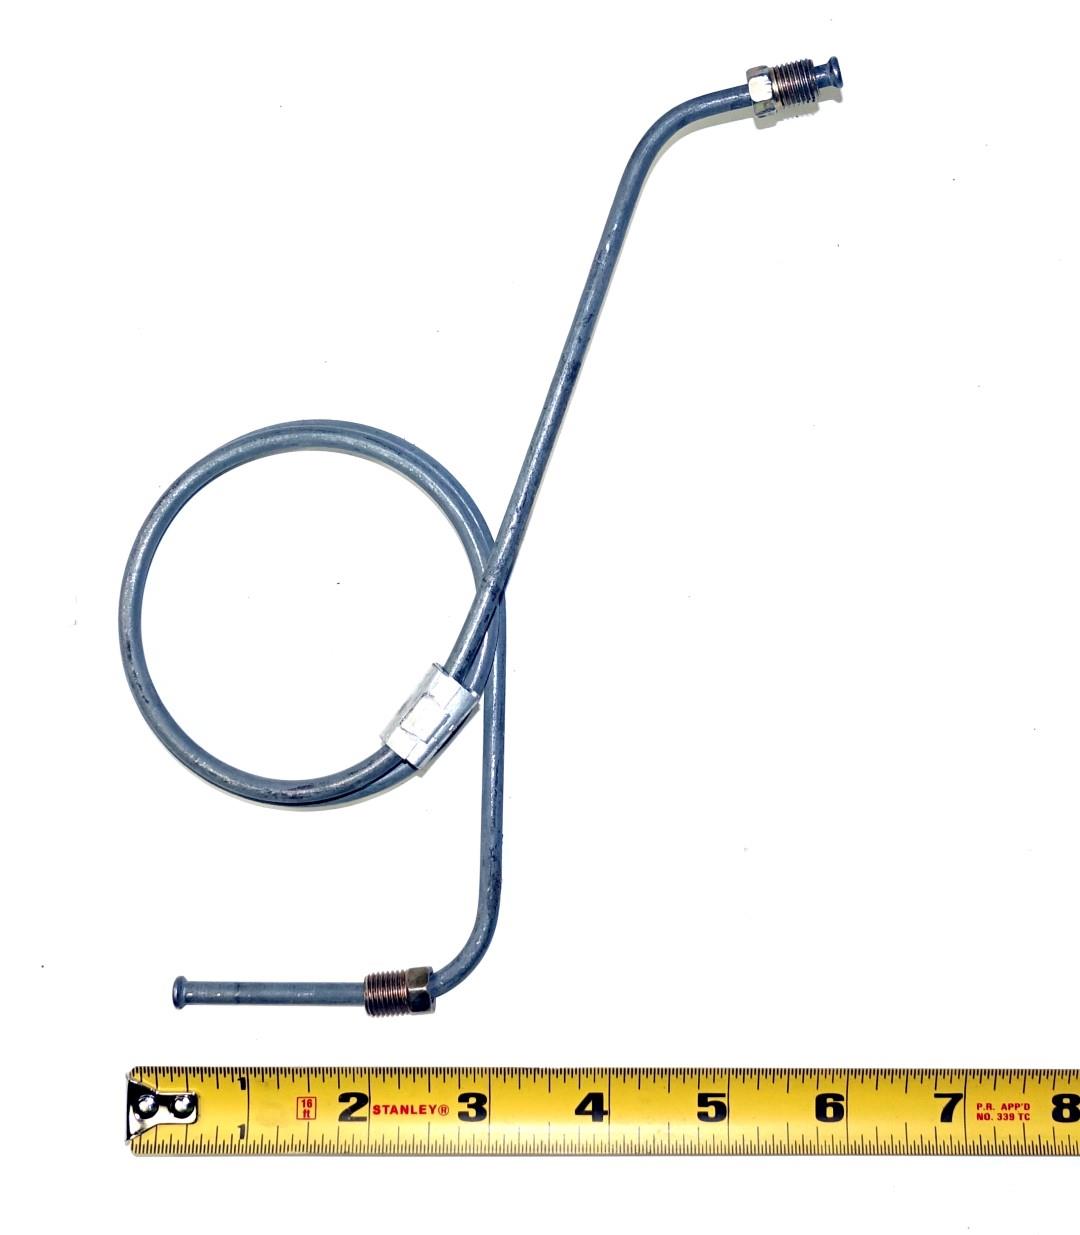 HM-772 | 4710-01-185-9667 Hydraulic Brake Line Proportioning Valve to Tee for HMMWV NOS (6).JPG